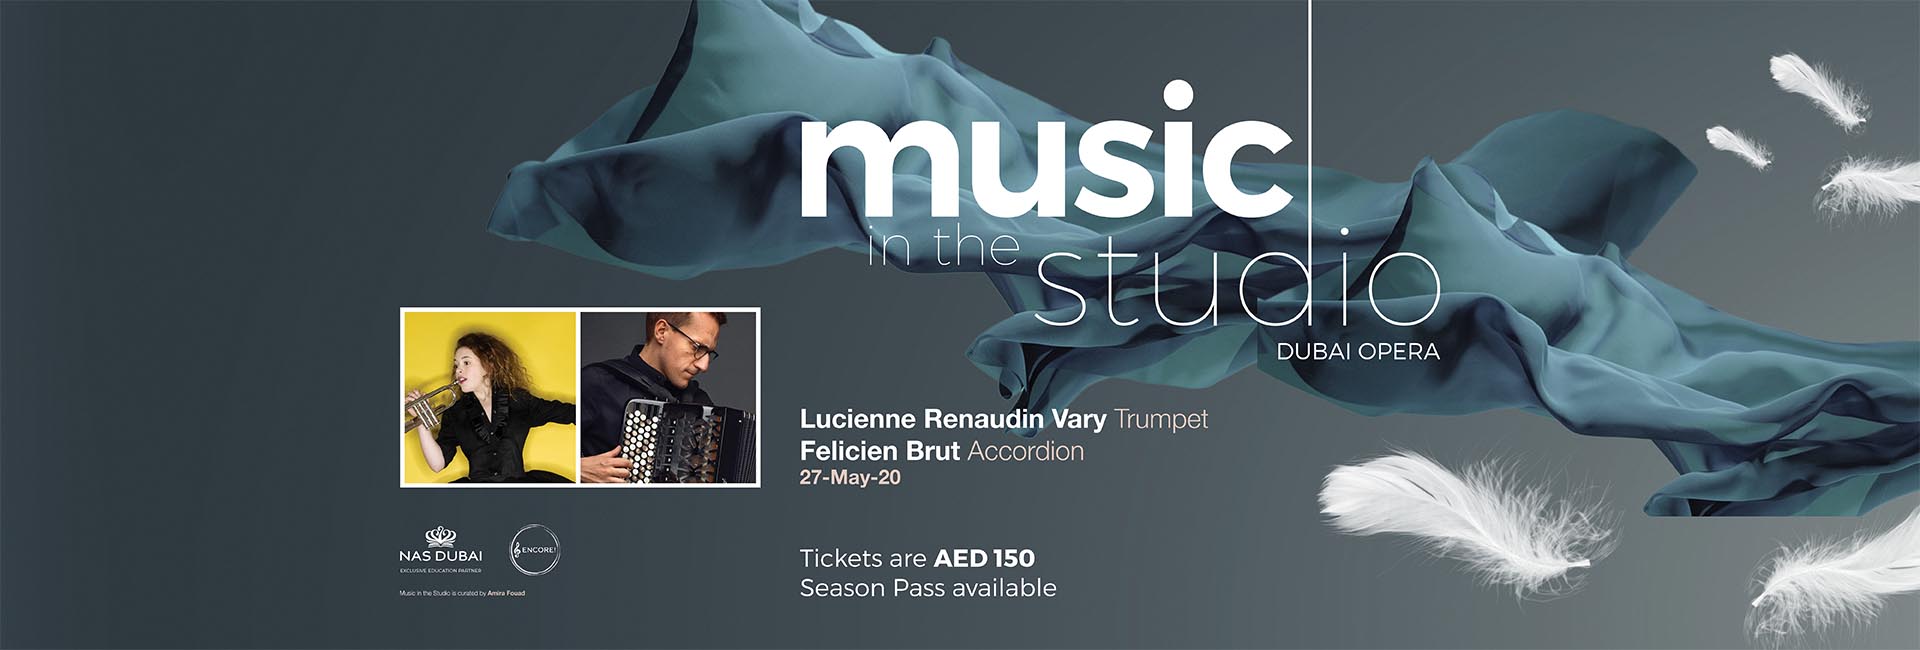 Music in the Studio: Lucienne Renaudin Vary on May 27th at Dubai Opera